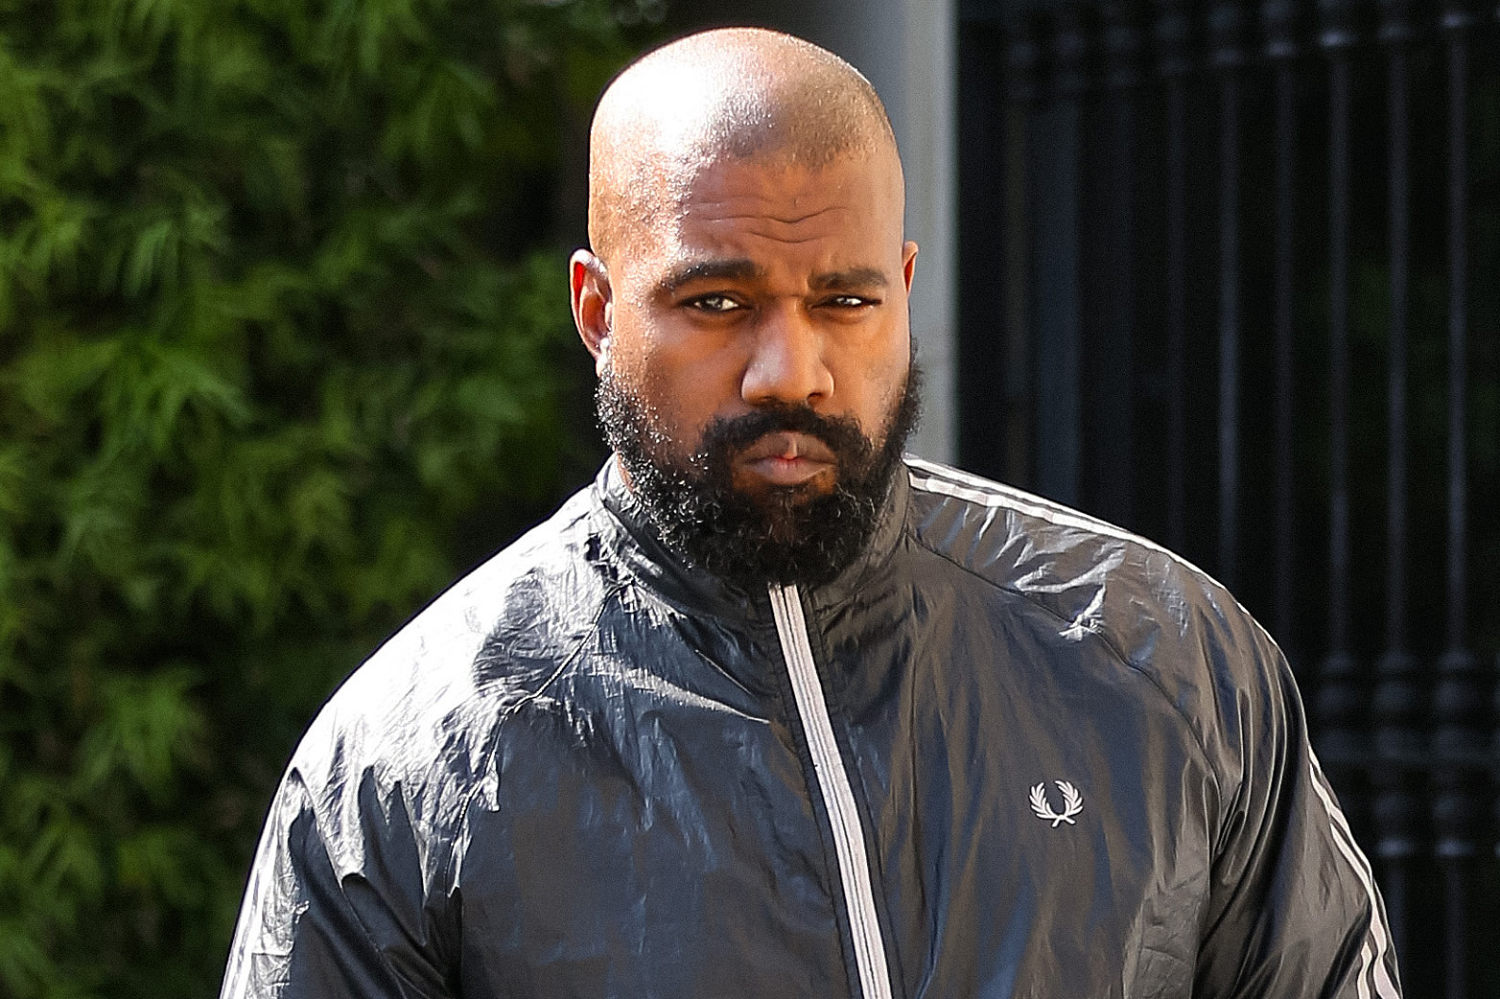 Ye wanted to shave Donda Academy students' heads and lock kids in cages, ex-employee says in lawsuit